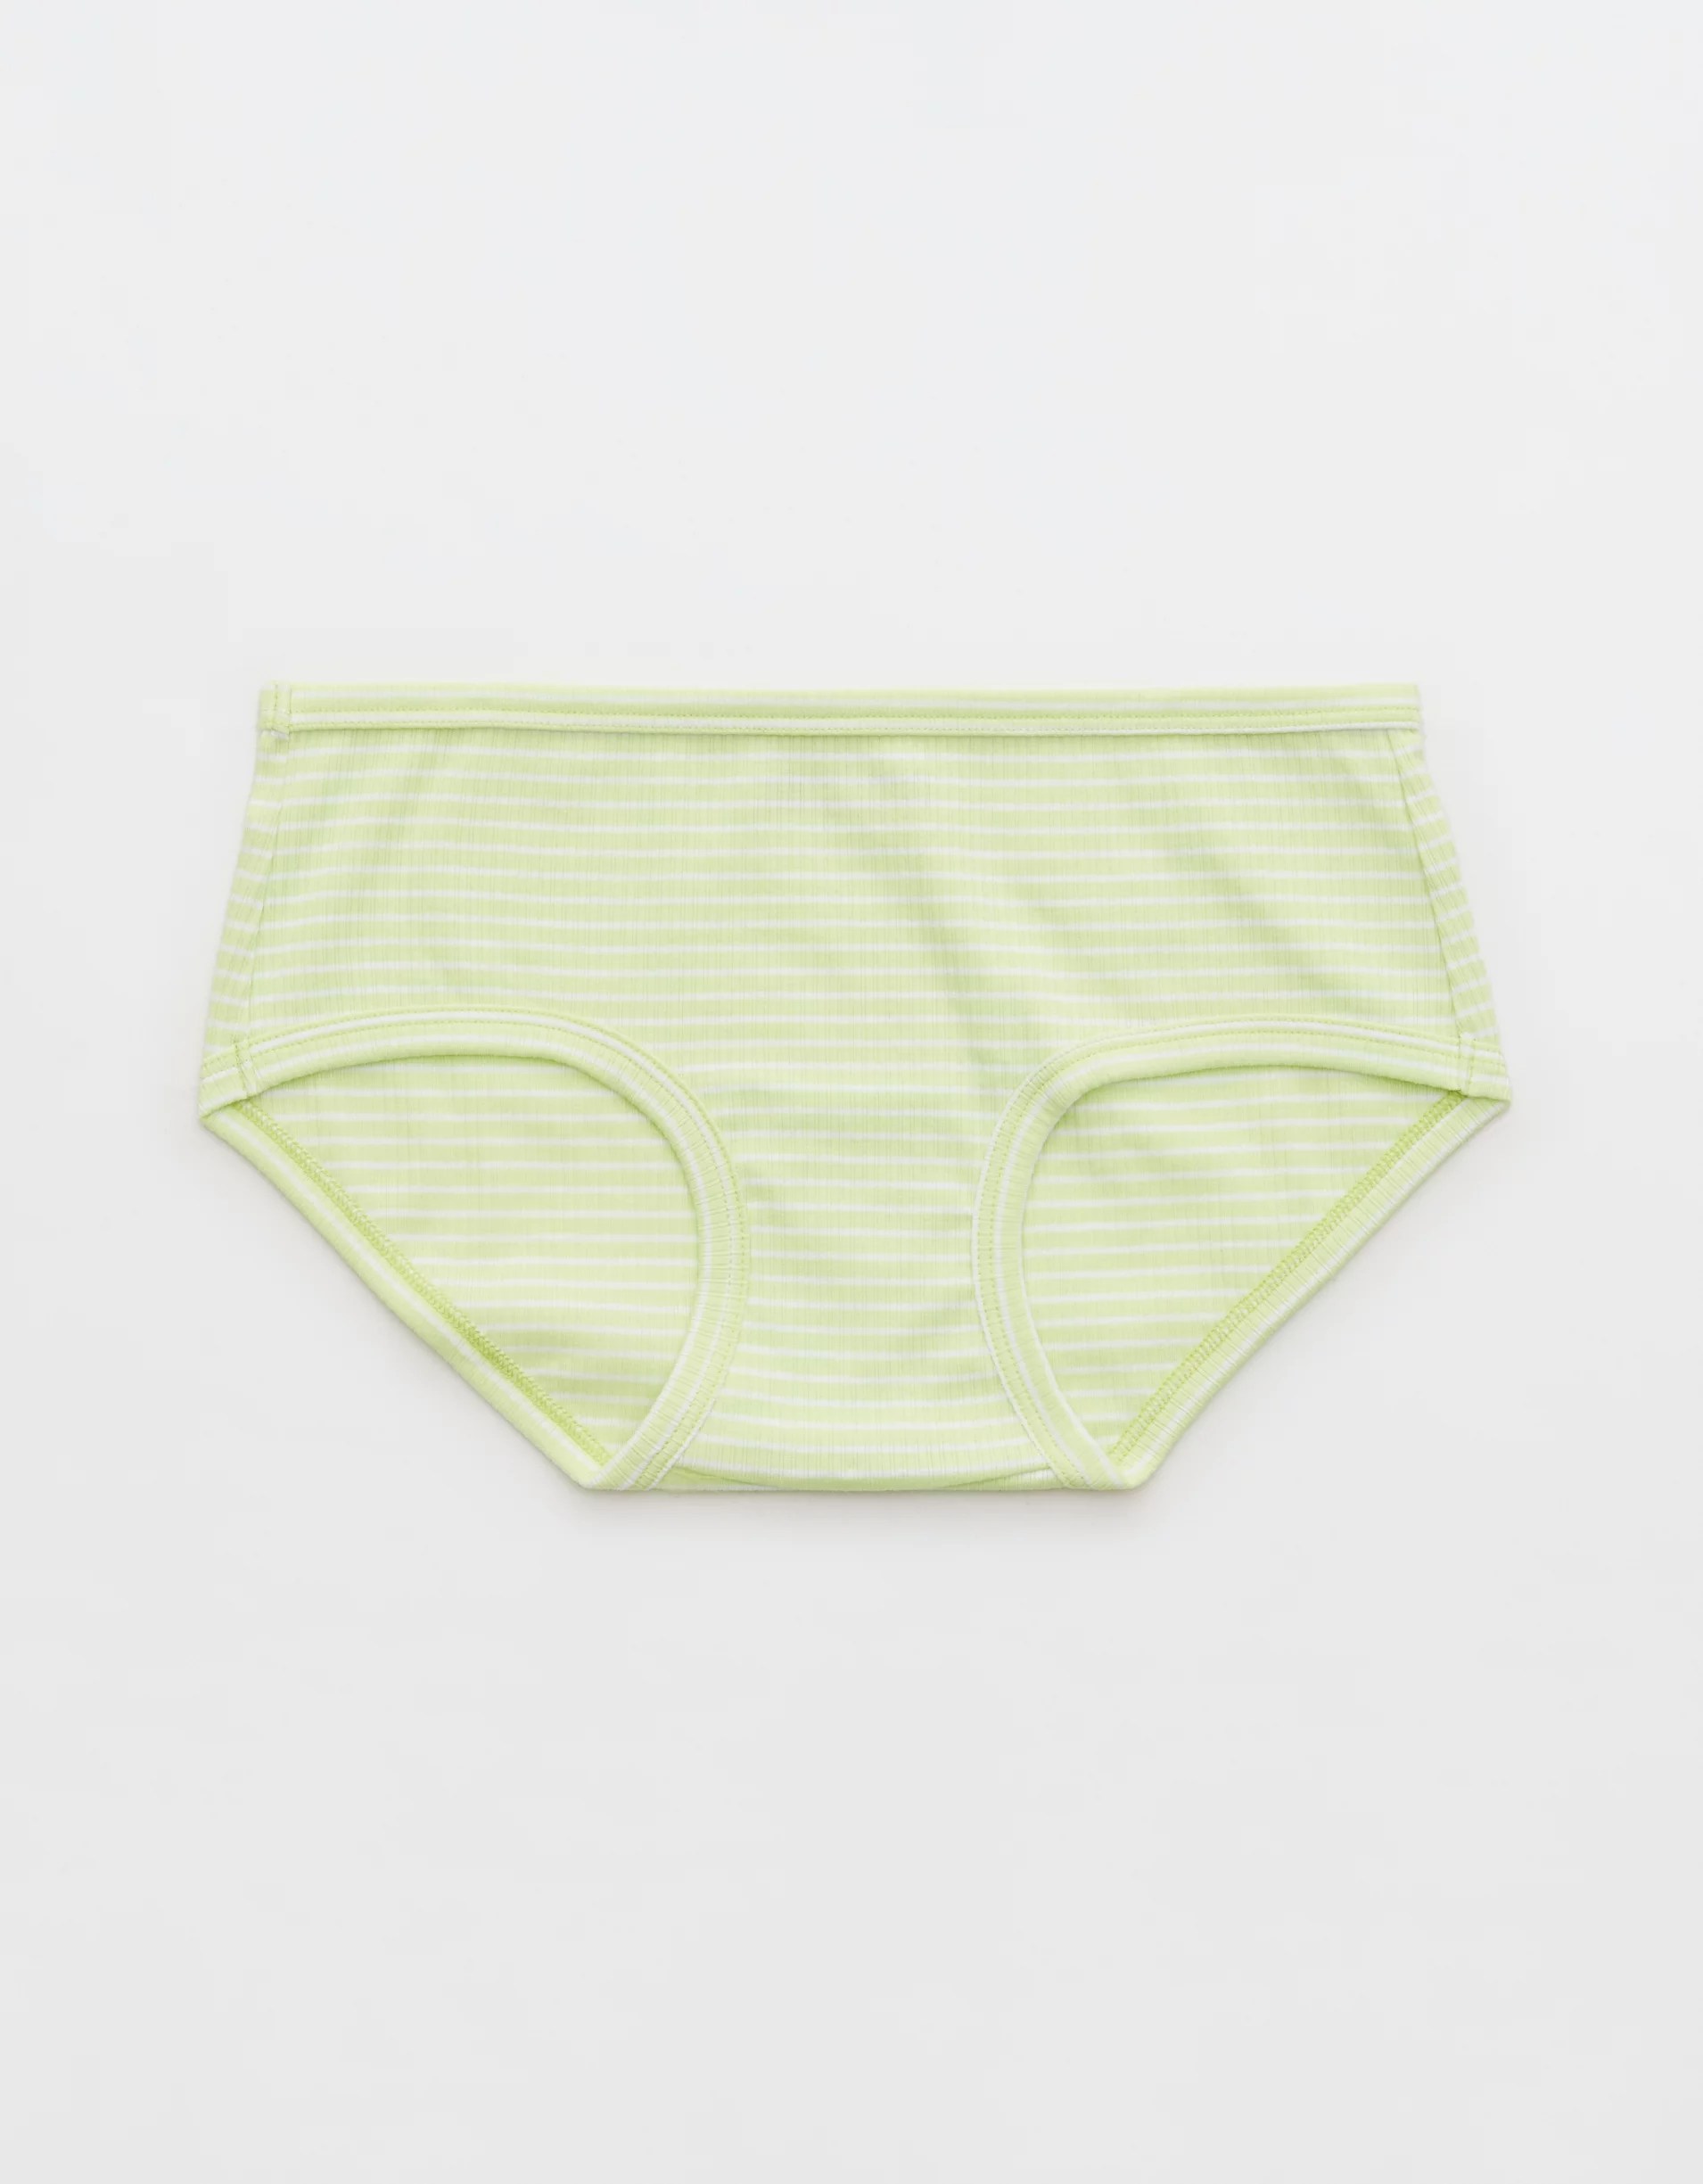 The Best Underwear To Buy, According to Gynecologists